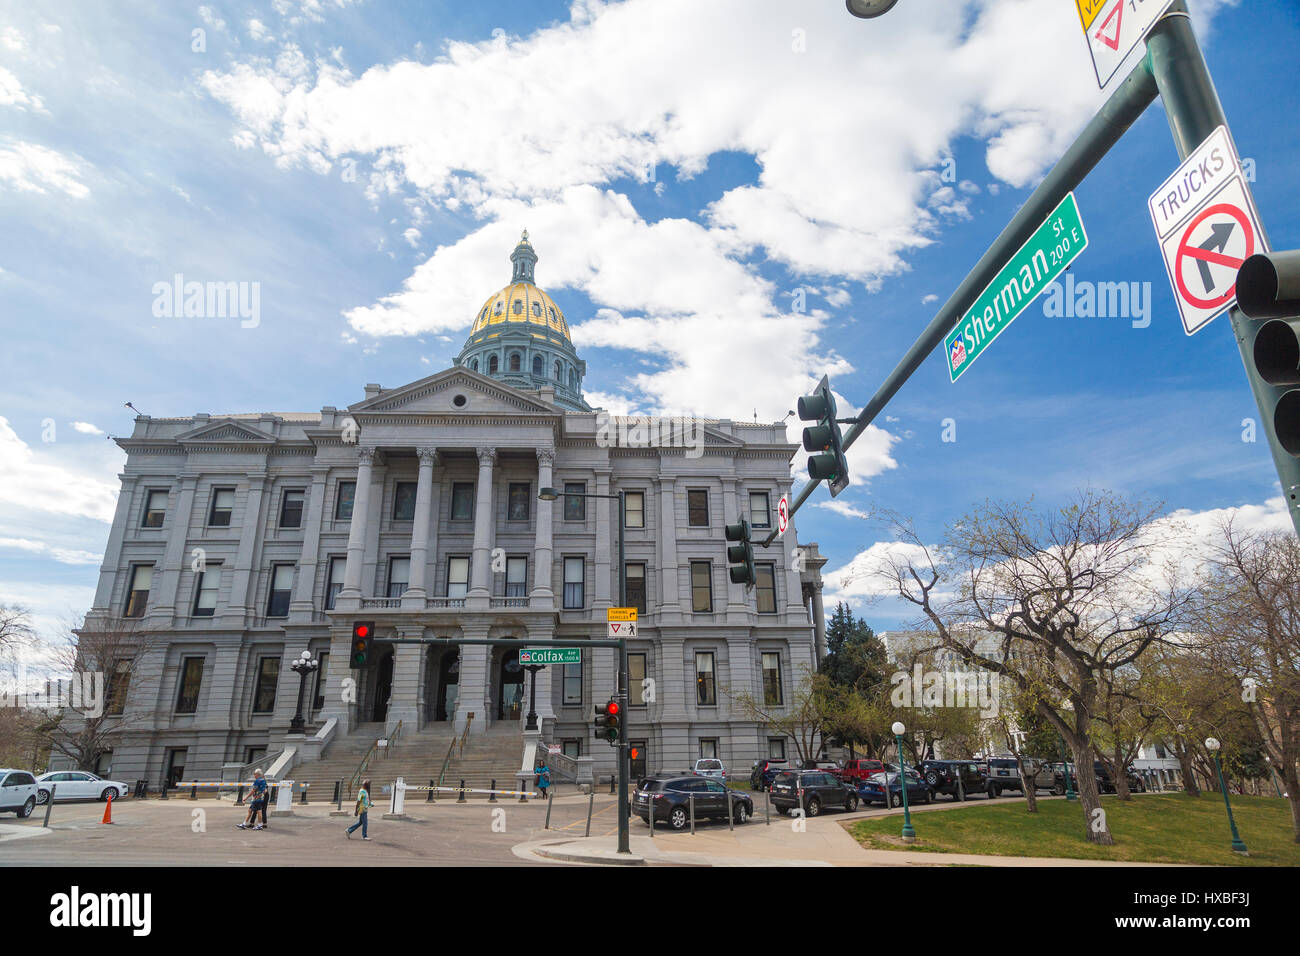 The state capitol building exterior wide angle view with the Sherman and Colfax Street signs in Denver, Colorado Stock Photo